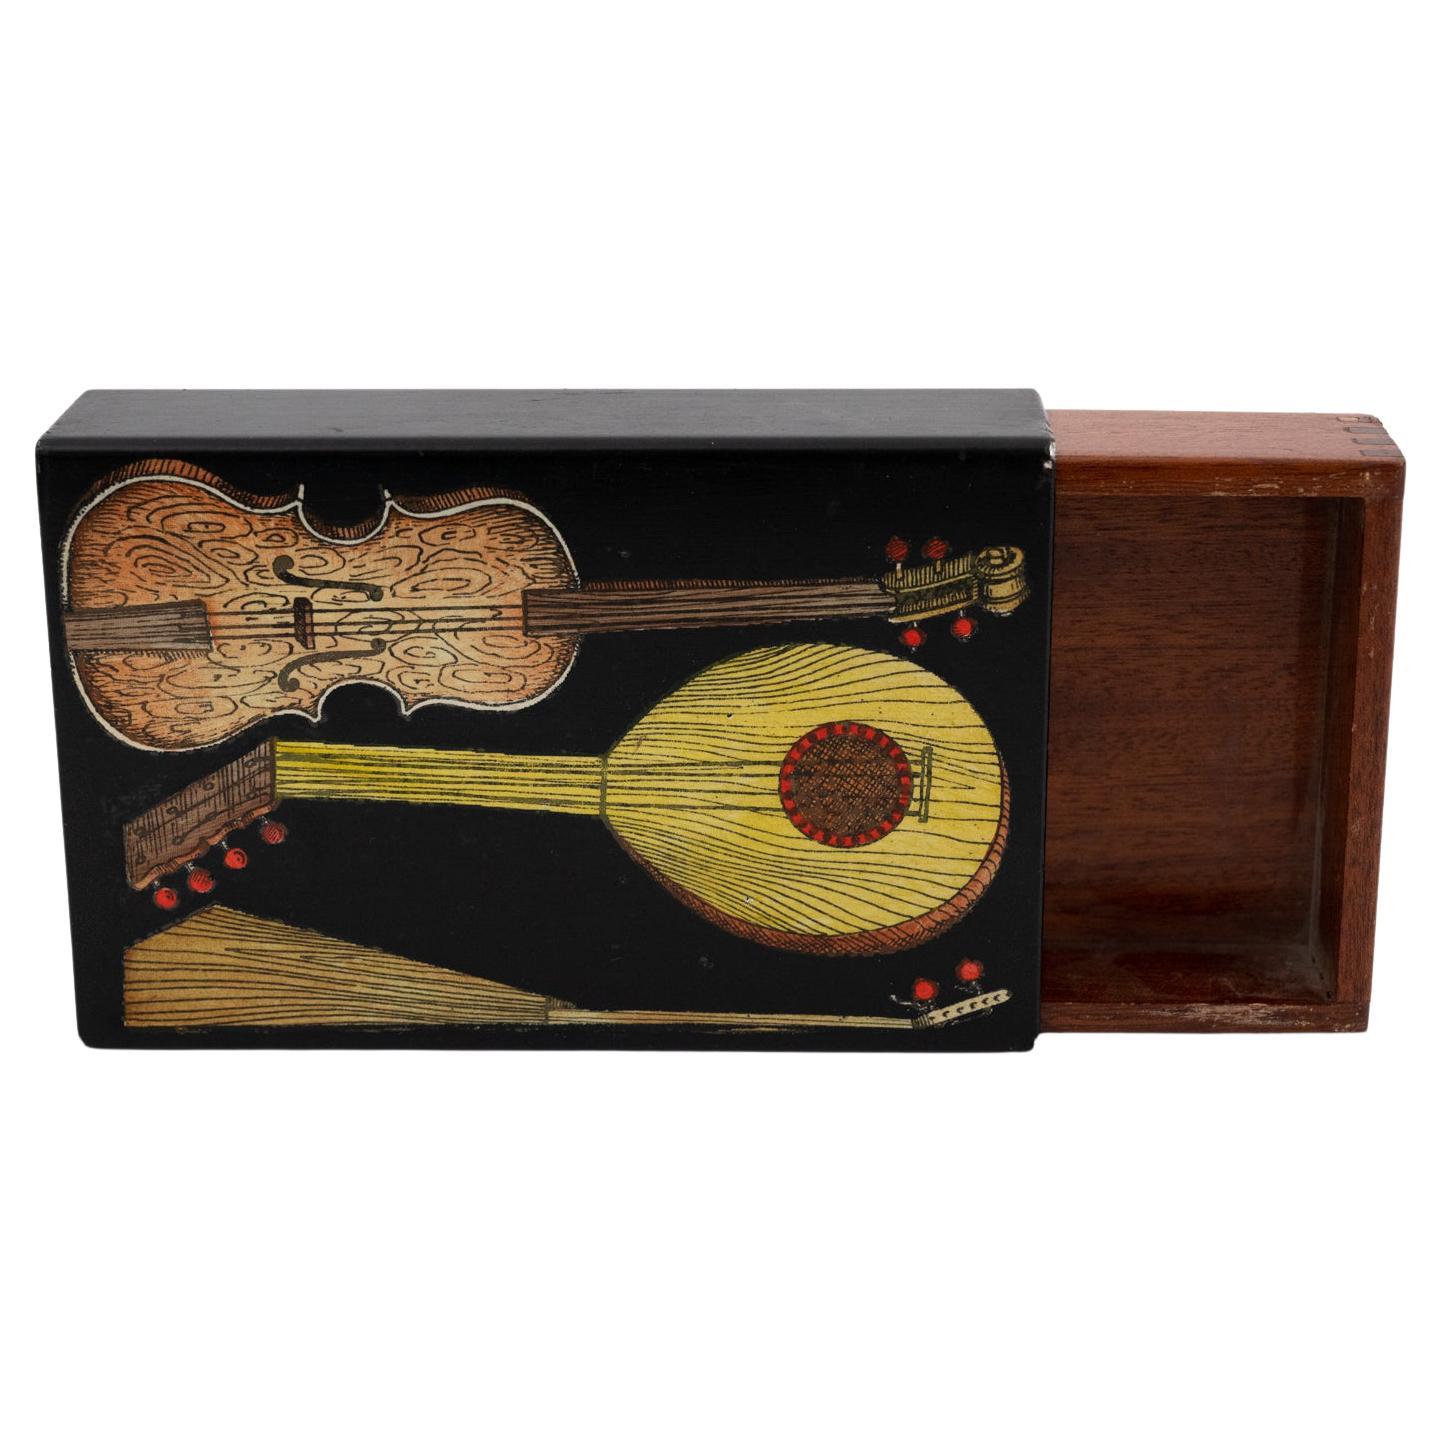 A small Piero Fornasetti box decorated with guitars and zithers
Metal, lithographically printed and hand coloured. 
Mahogany interior, Fornasetti label to the base.
Italy, circa 1960. 

Piero Fornasetti was one of the most prolific creators of